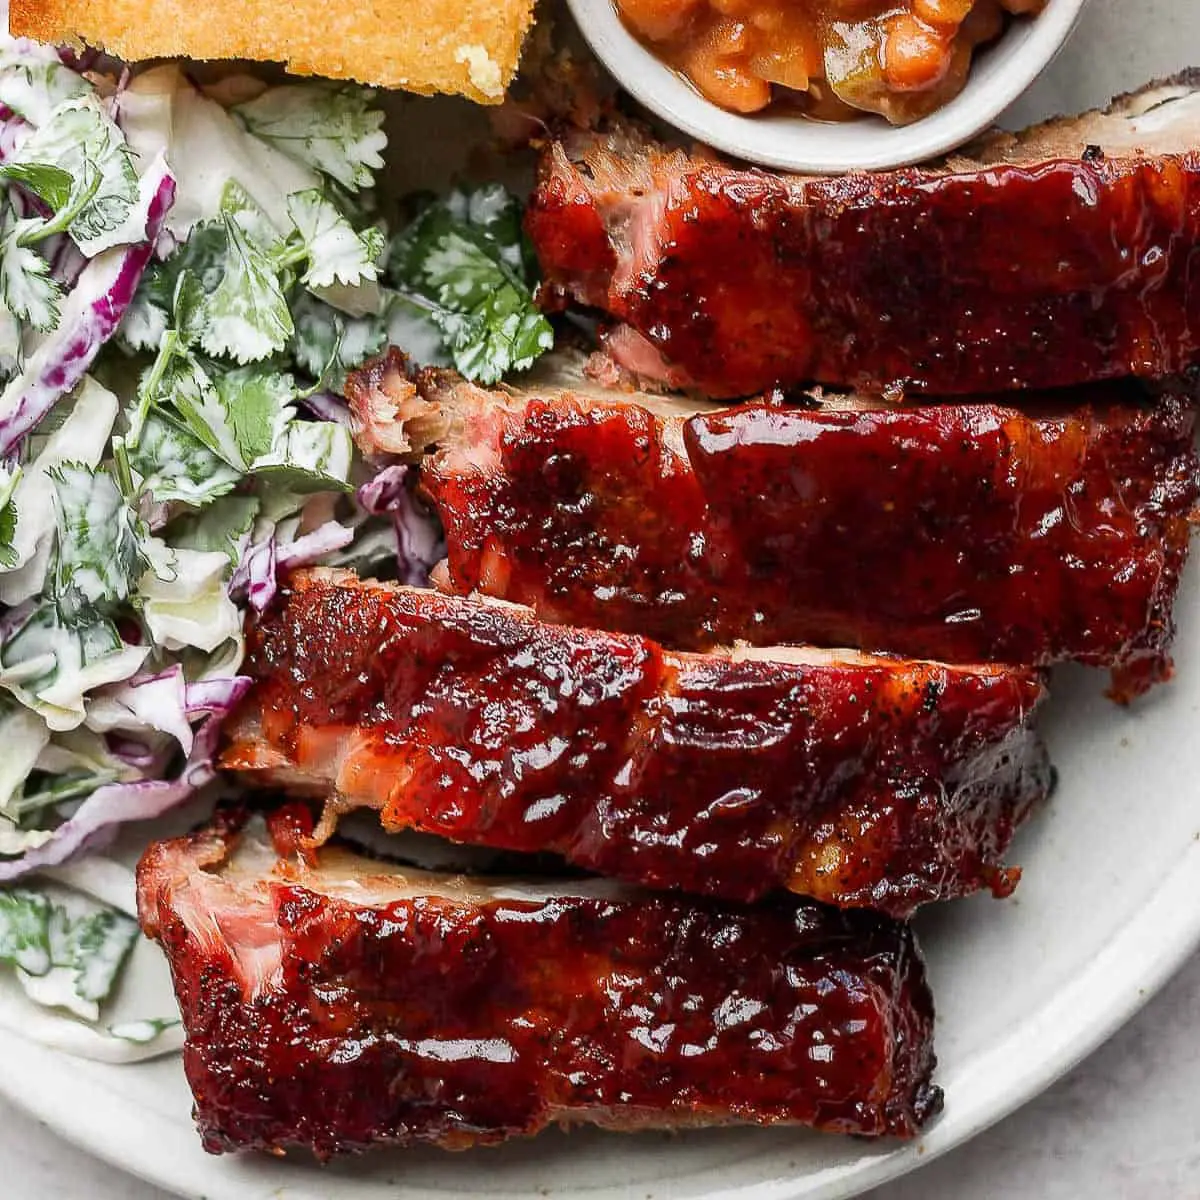 what goes with smoked ribs - What drink pairs with smoked ribs